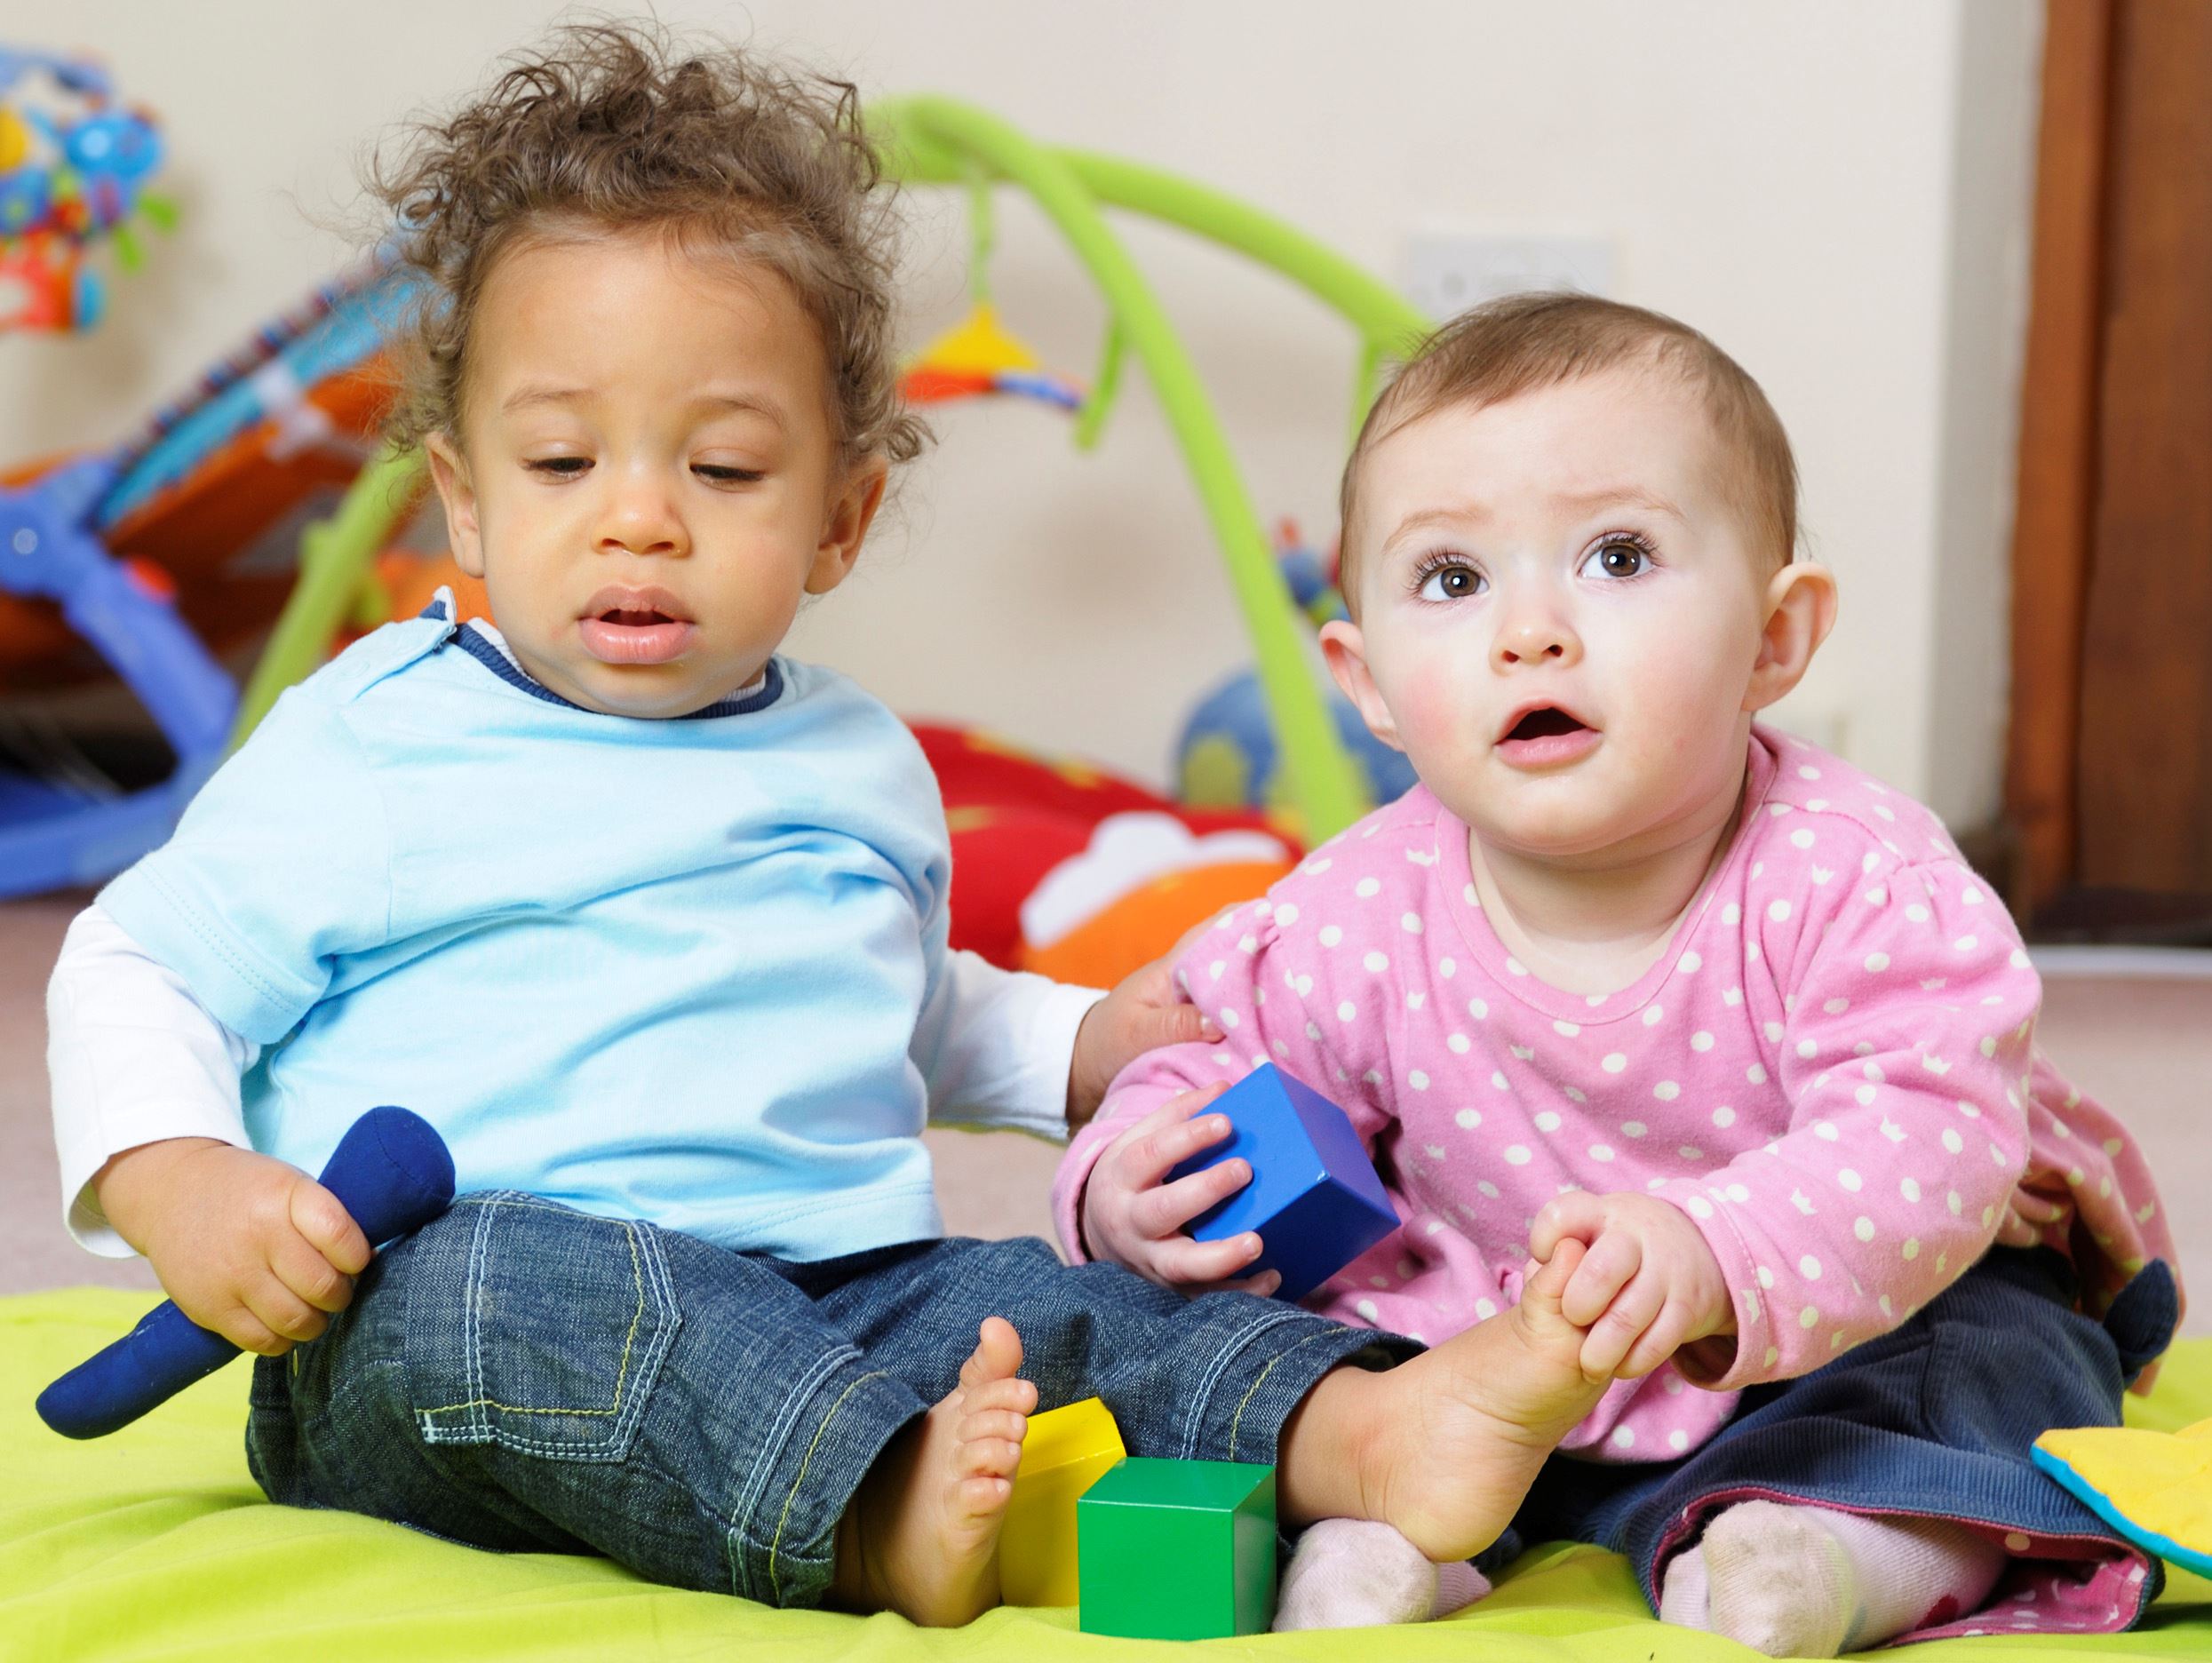 Two babies sit on the floor playing with blocks